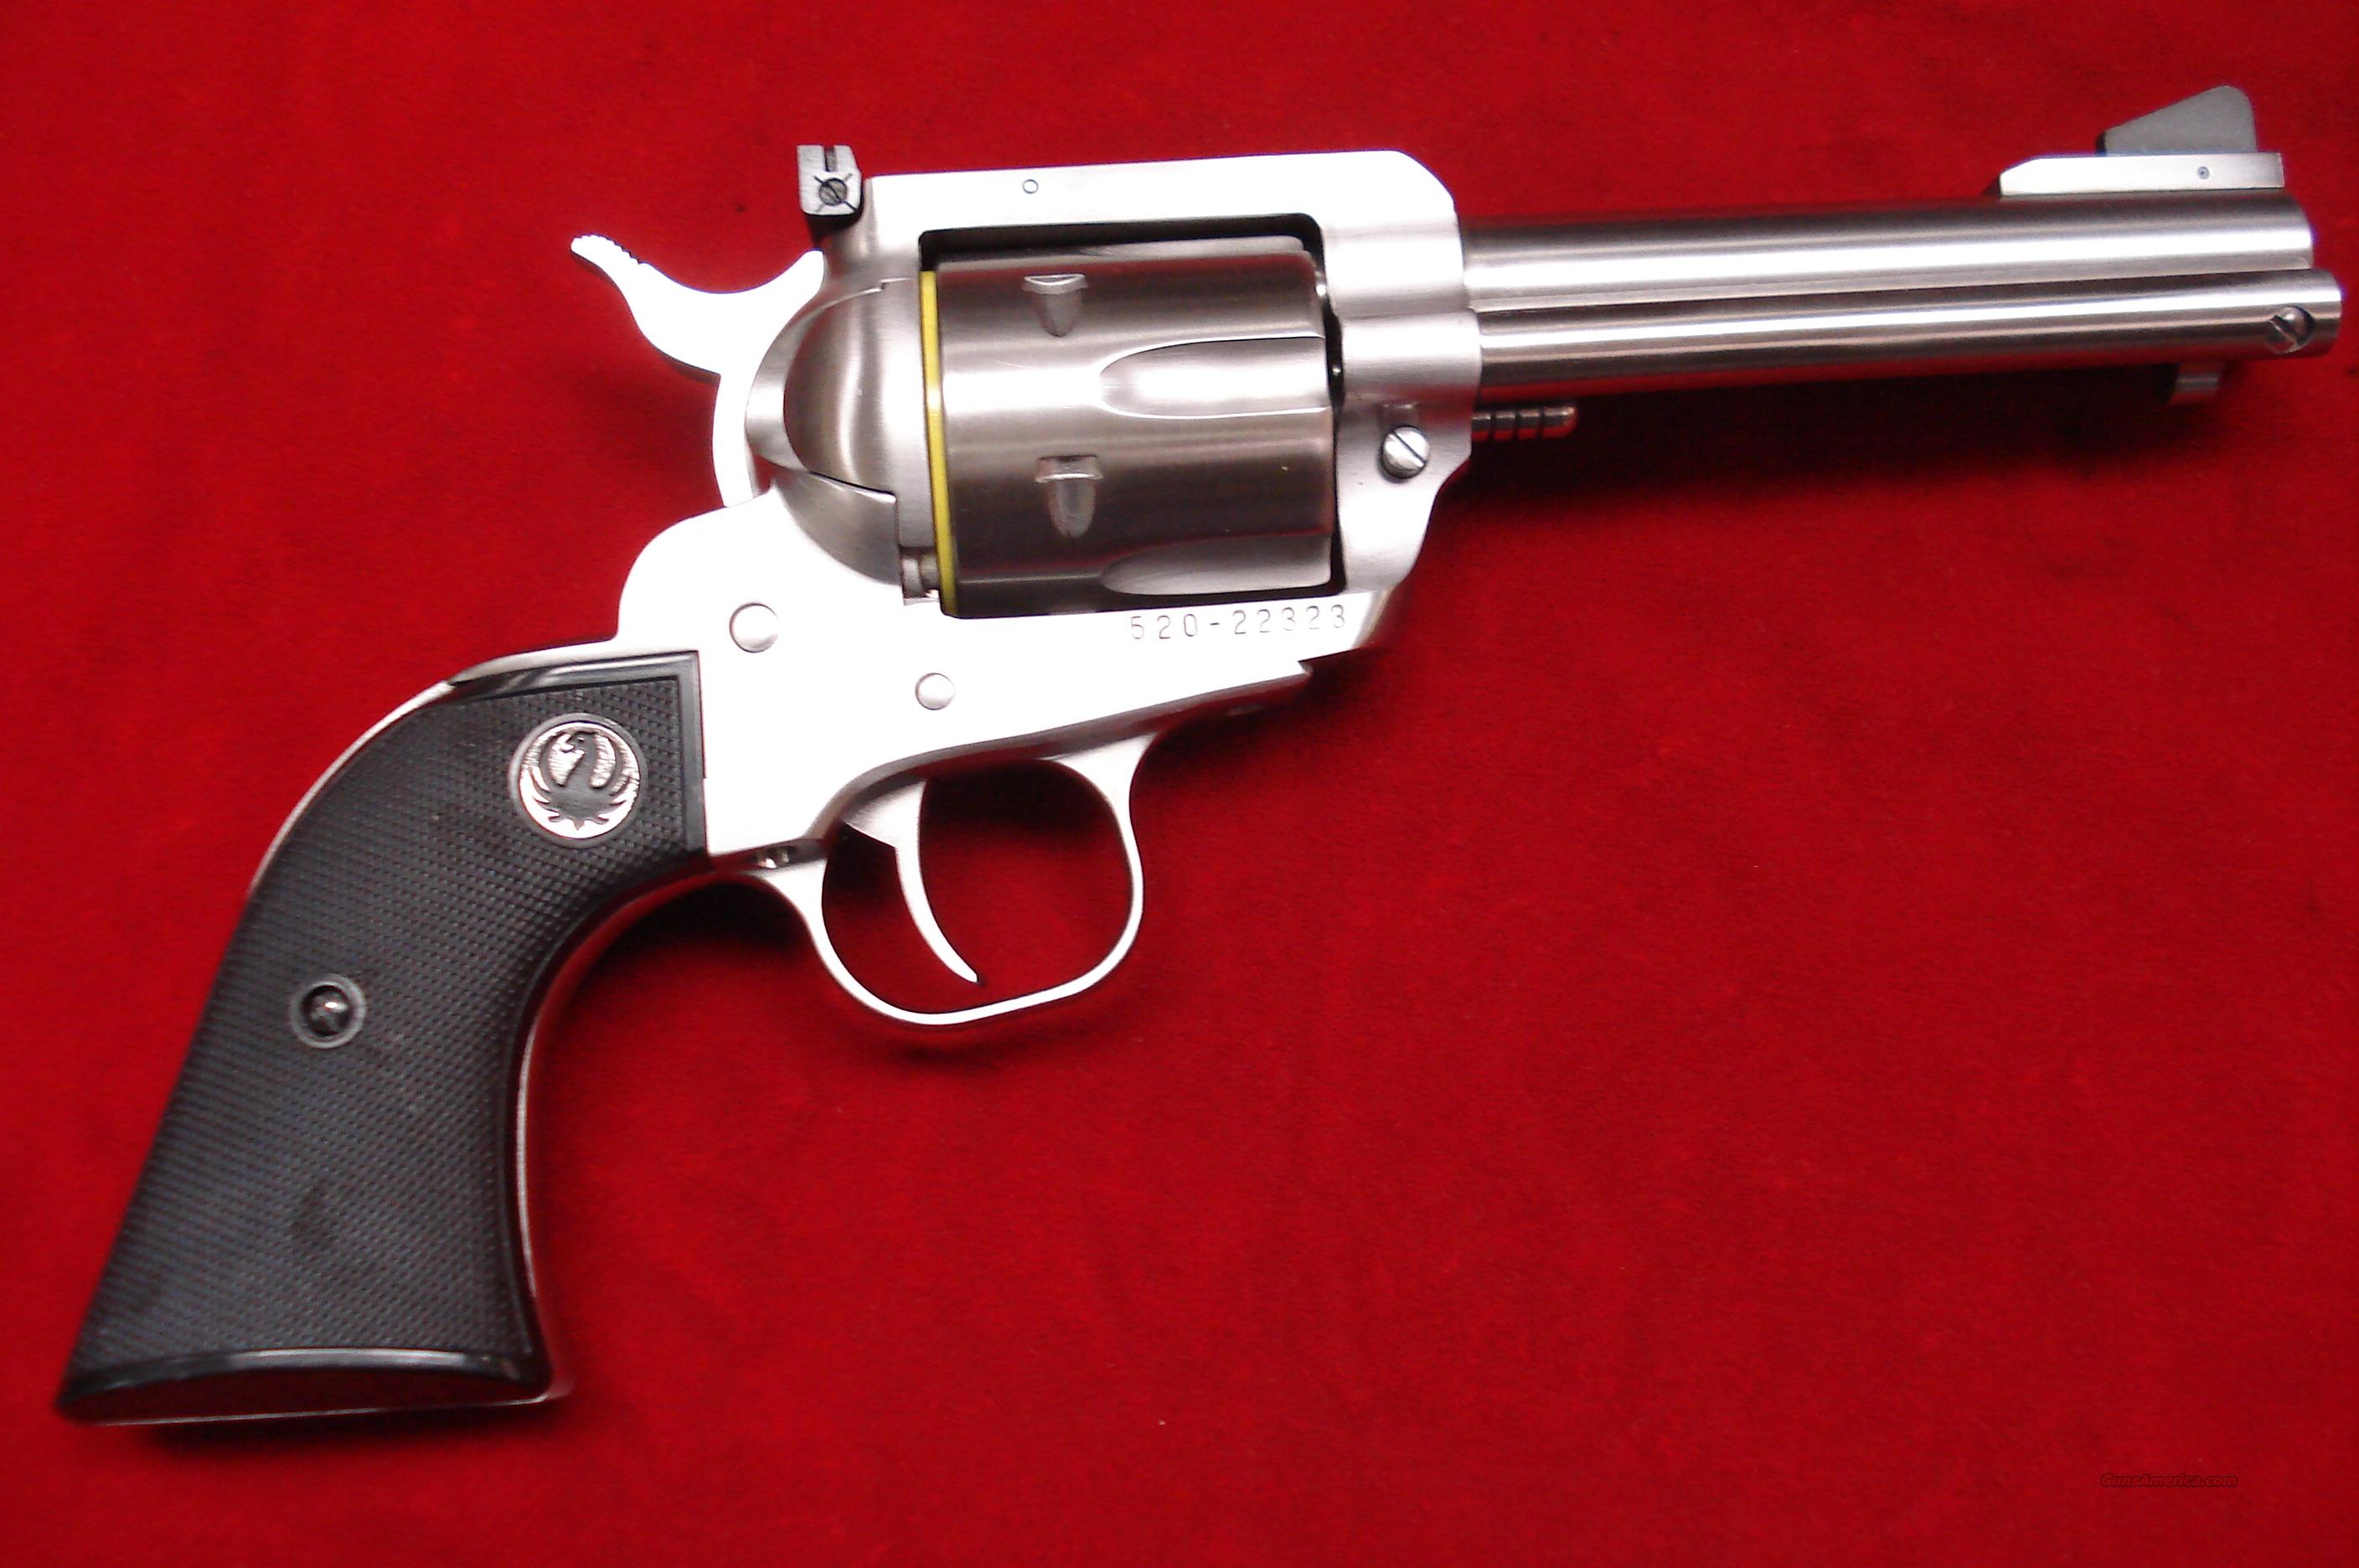 ruger new model blackhawk serial number search